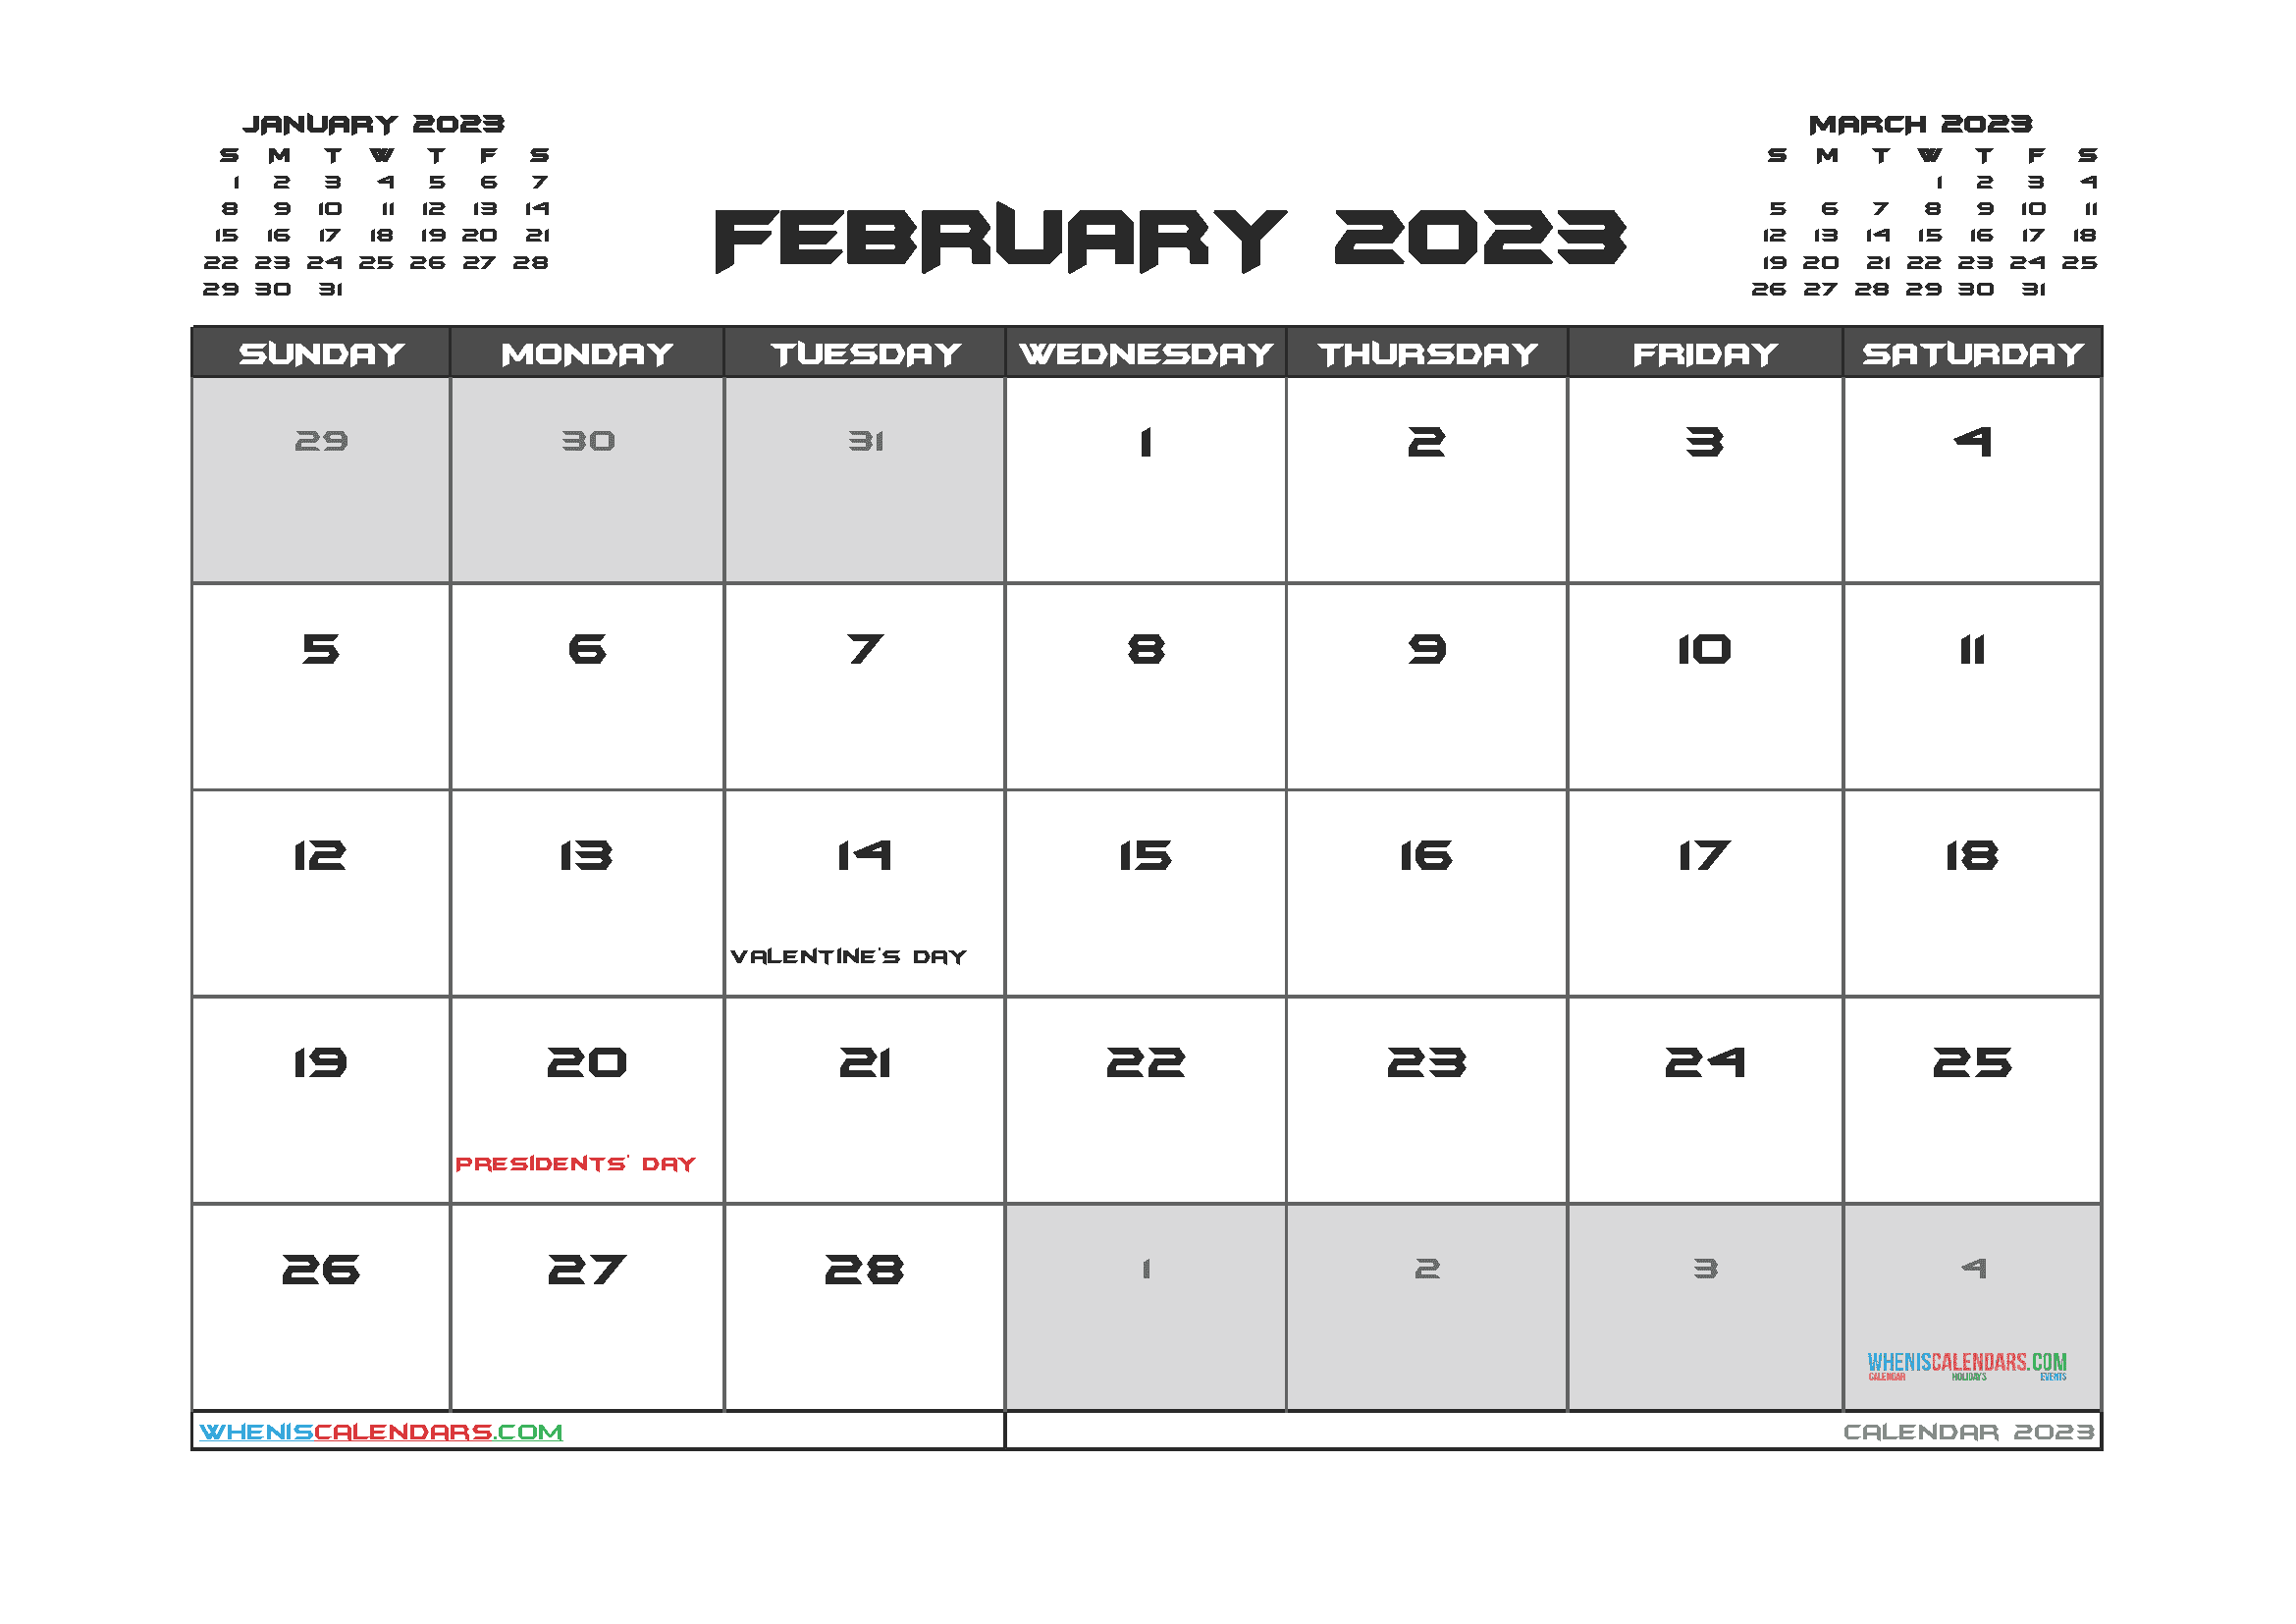 Free Calendar February 2023 with Holidays Printable PDF in Landscape